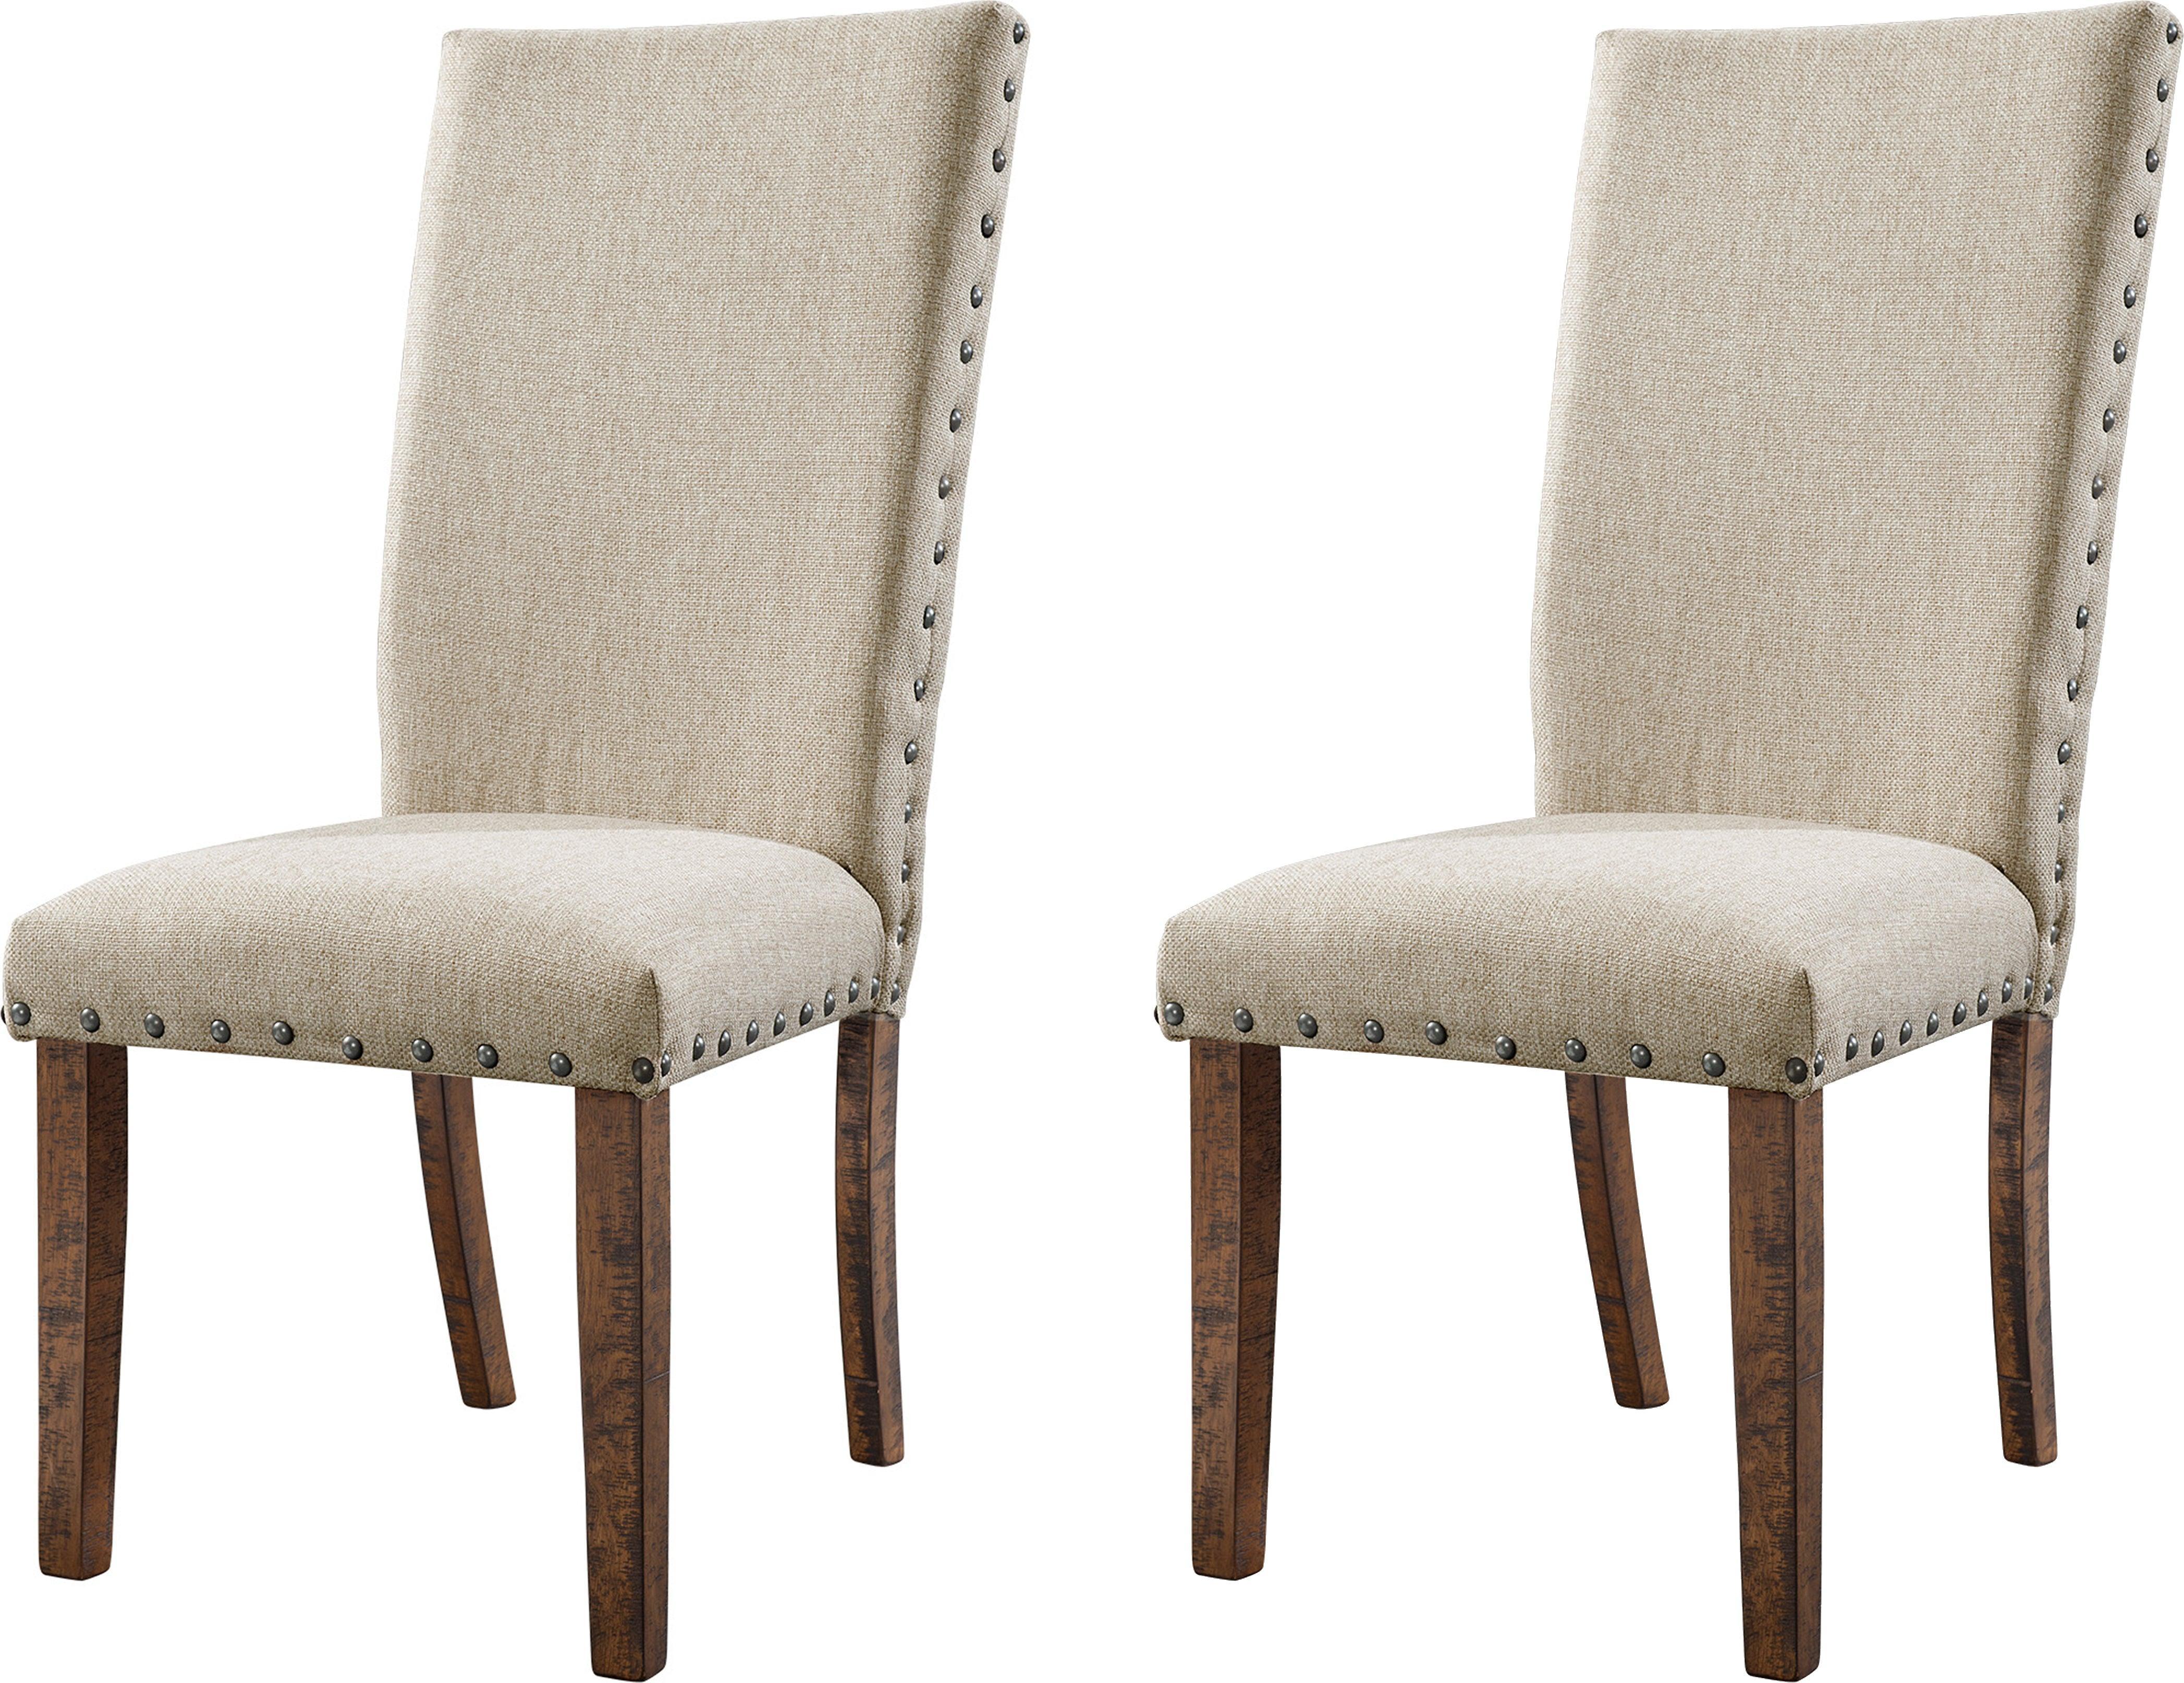 Elements Dining Chairs - Dex Upholstered Side Chair Set (Set of 2)